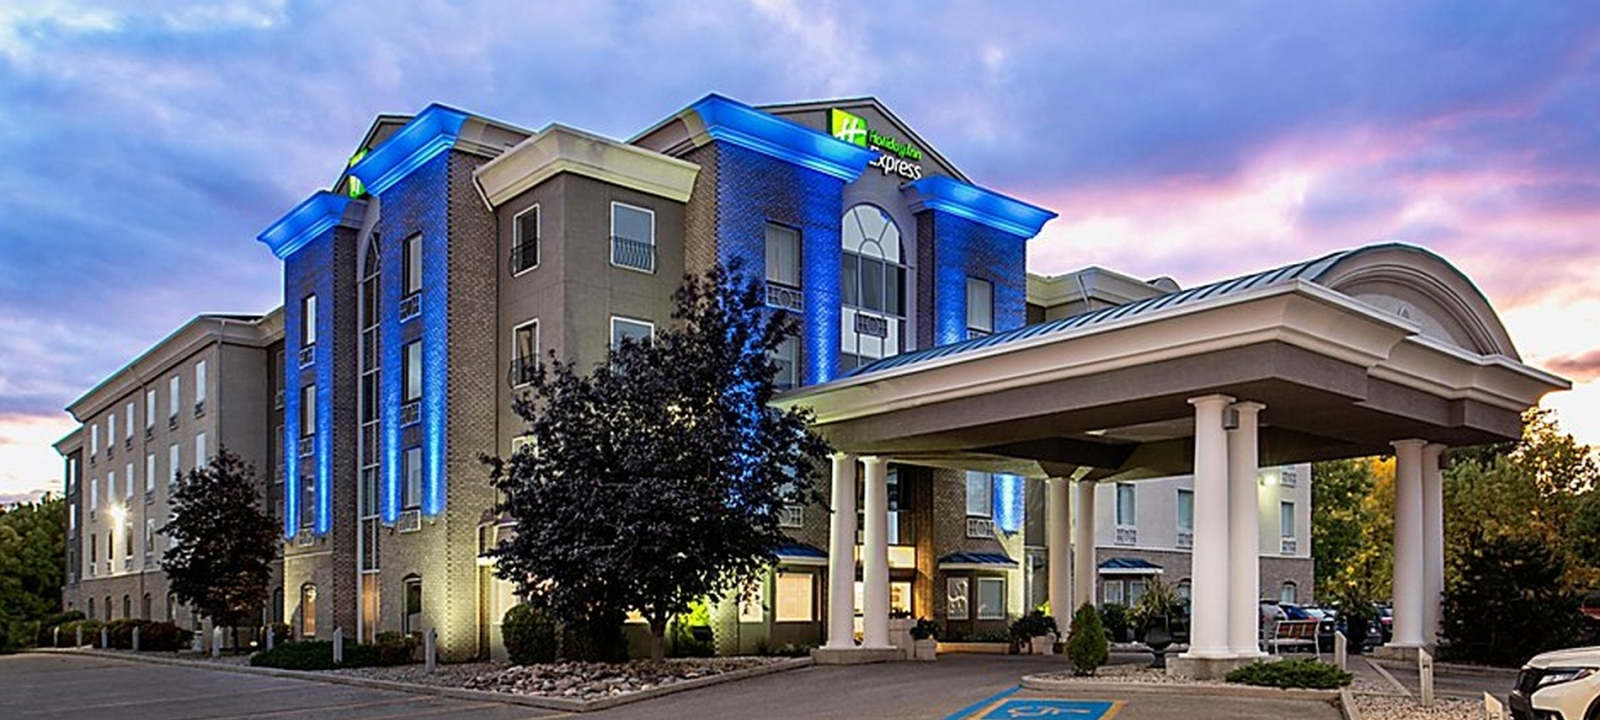 De-Stress and Splash Around with the Holiday Inn Express